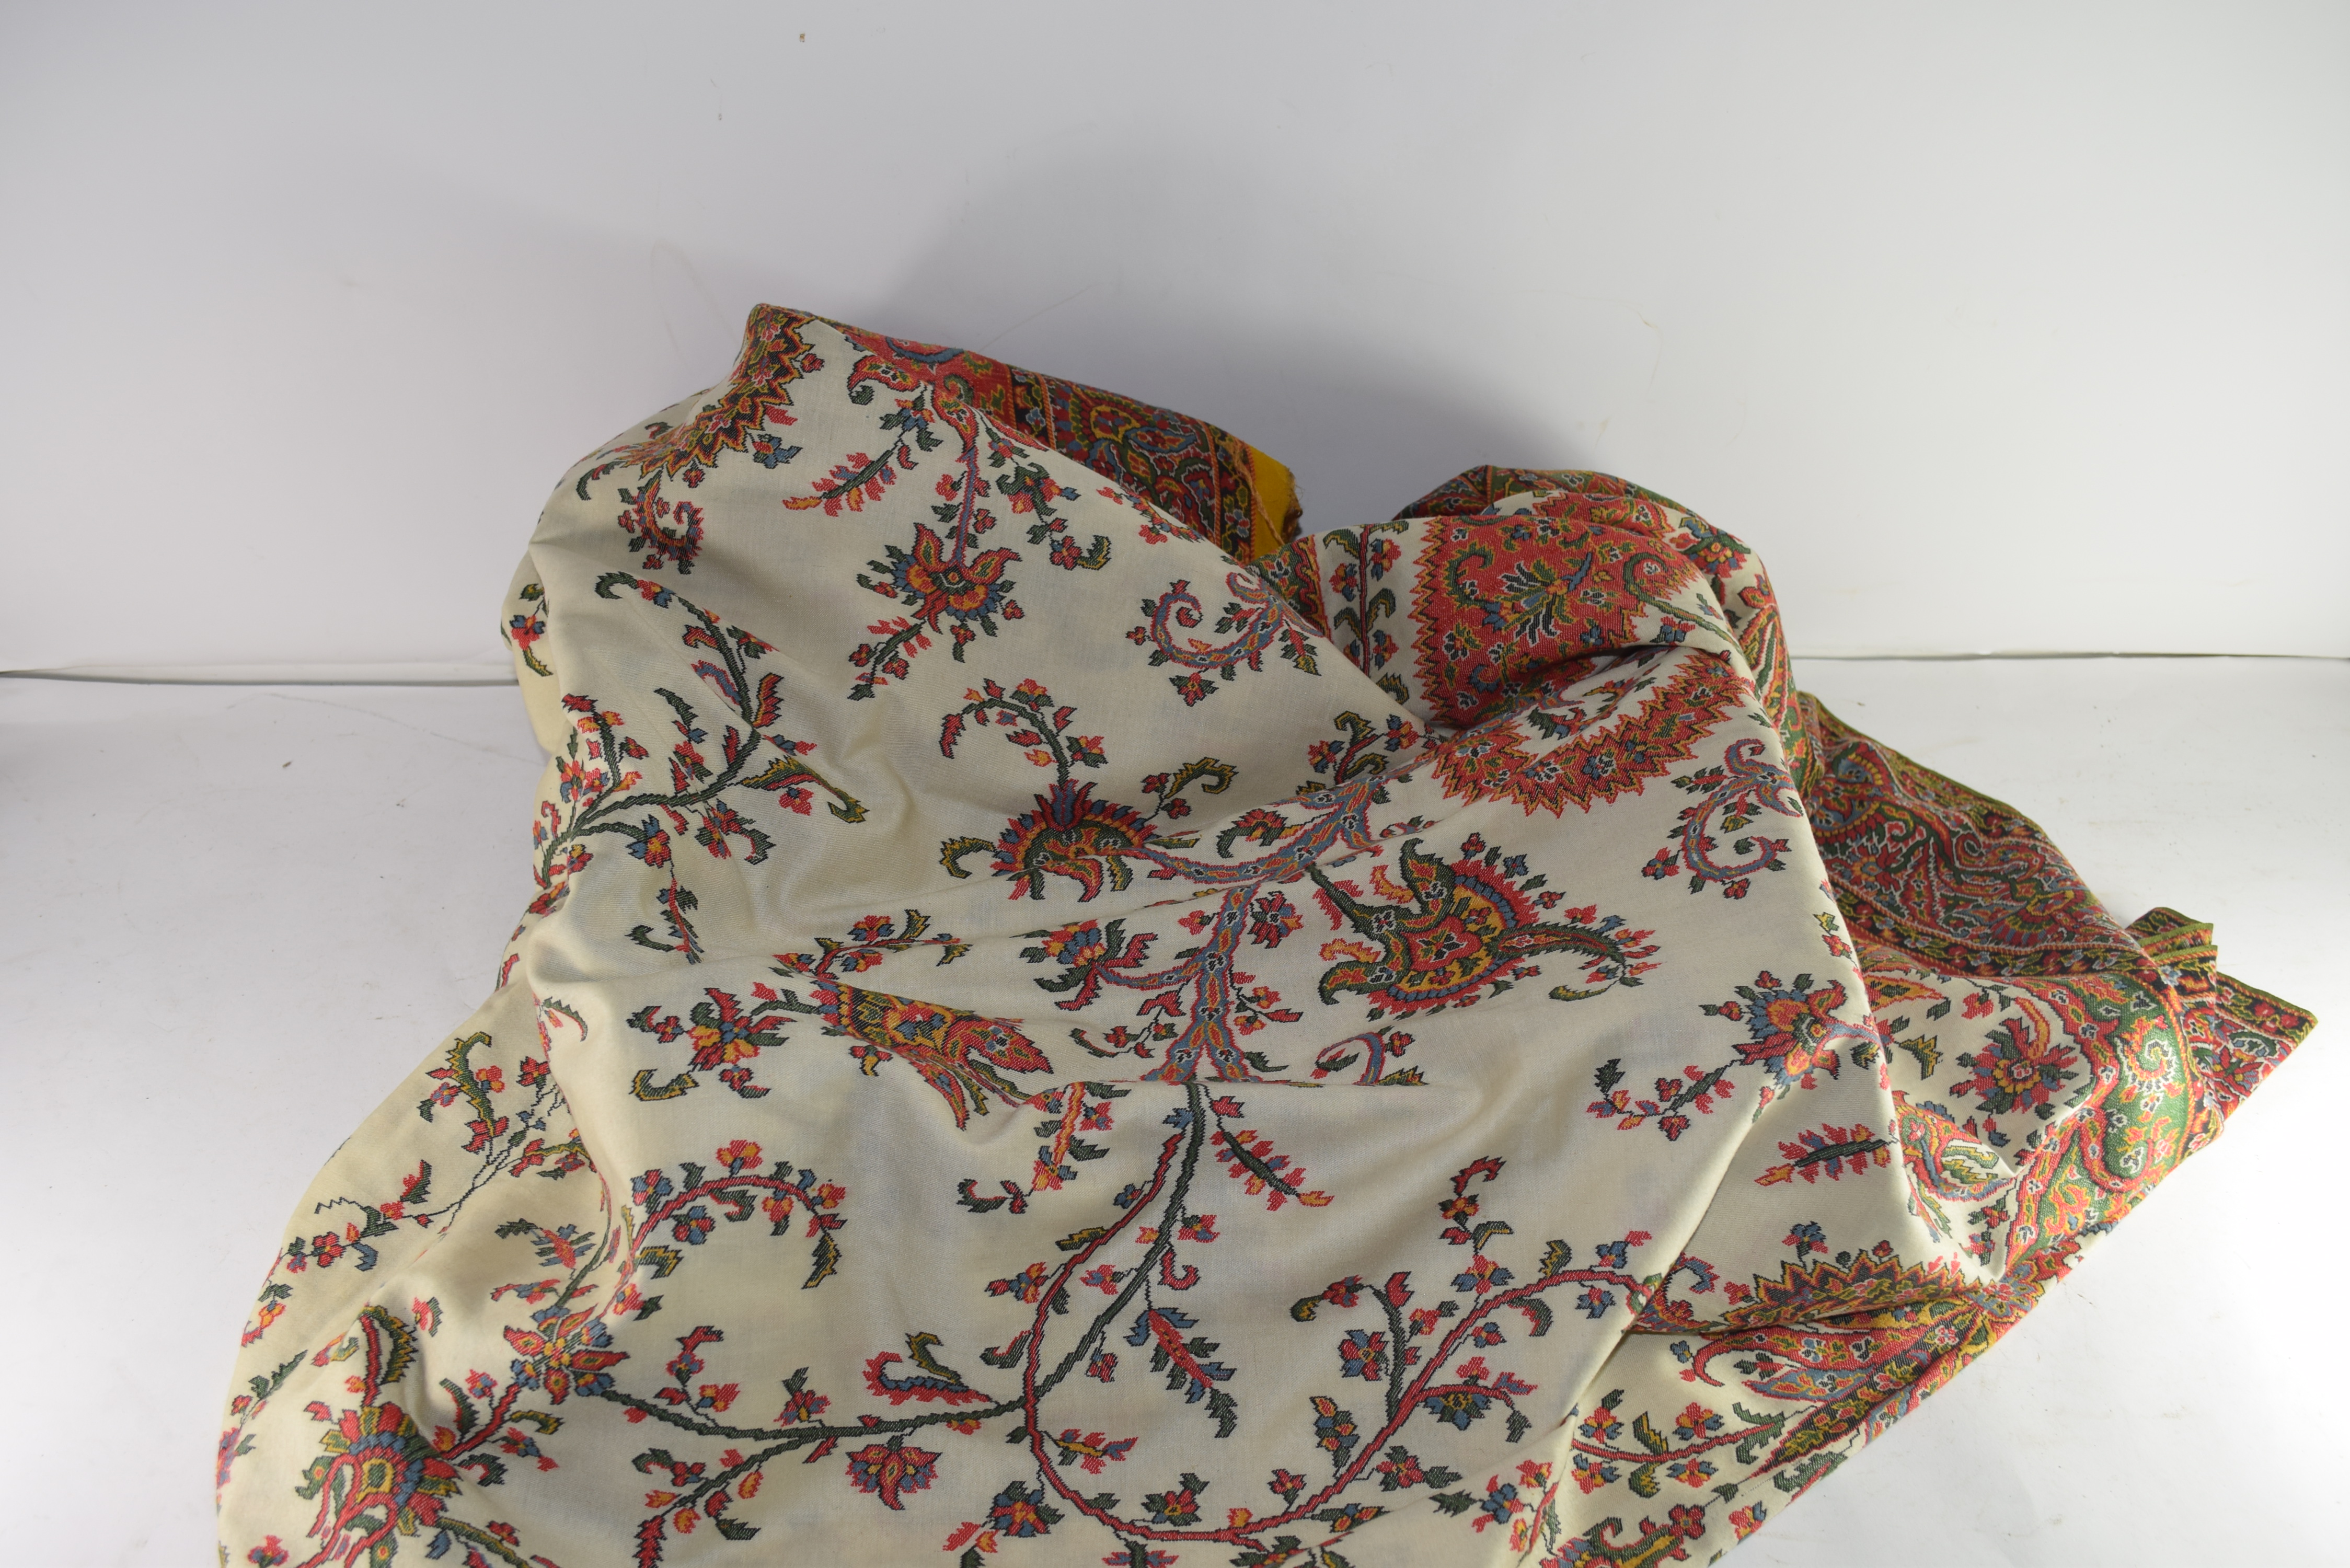 LARGE ANTIQUE KASHMIRI SHAWL DECORATED WITH STYLISED FLORAL DETAIL ON A PALE BACKGROUND, 177CM WIDE